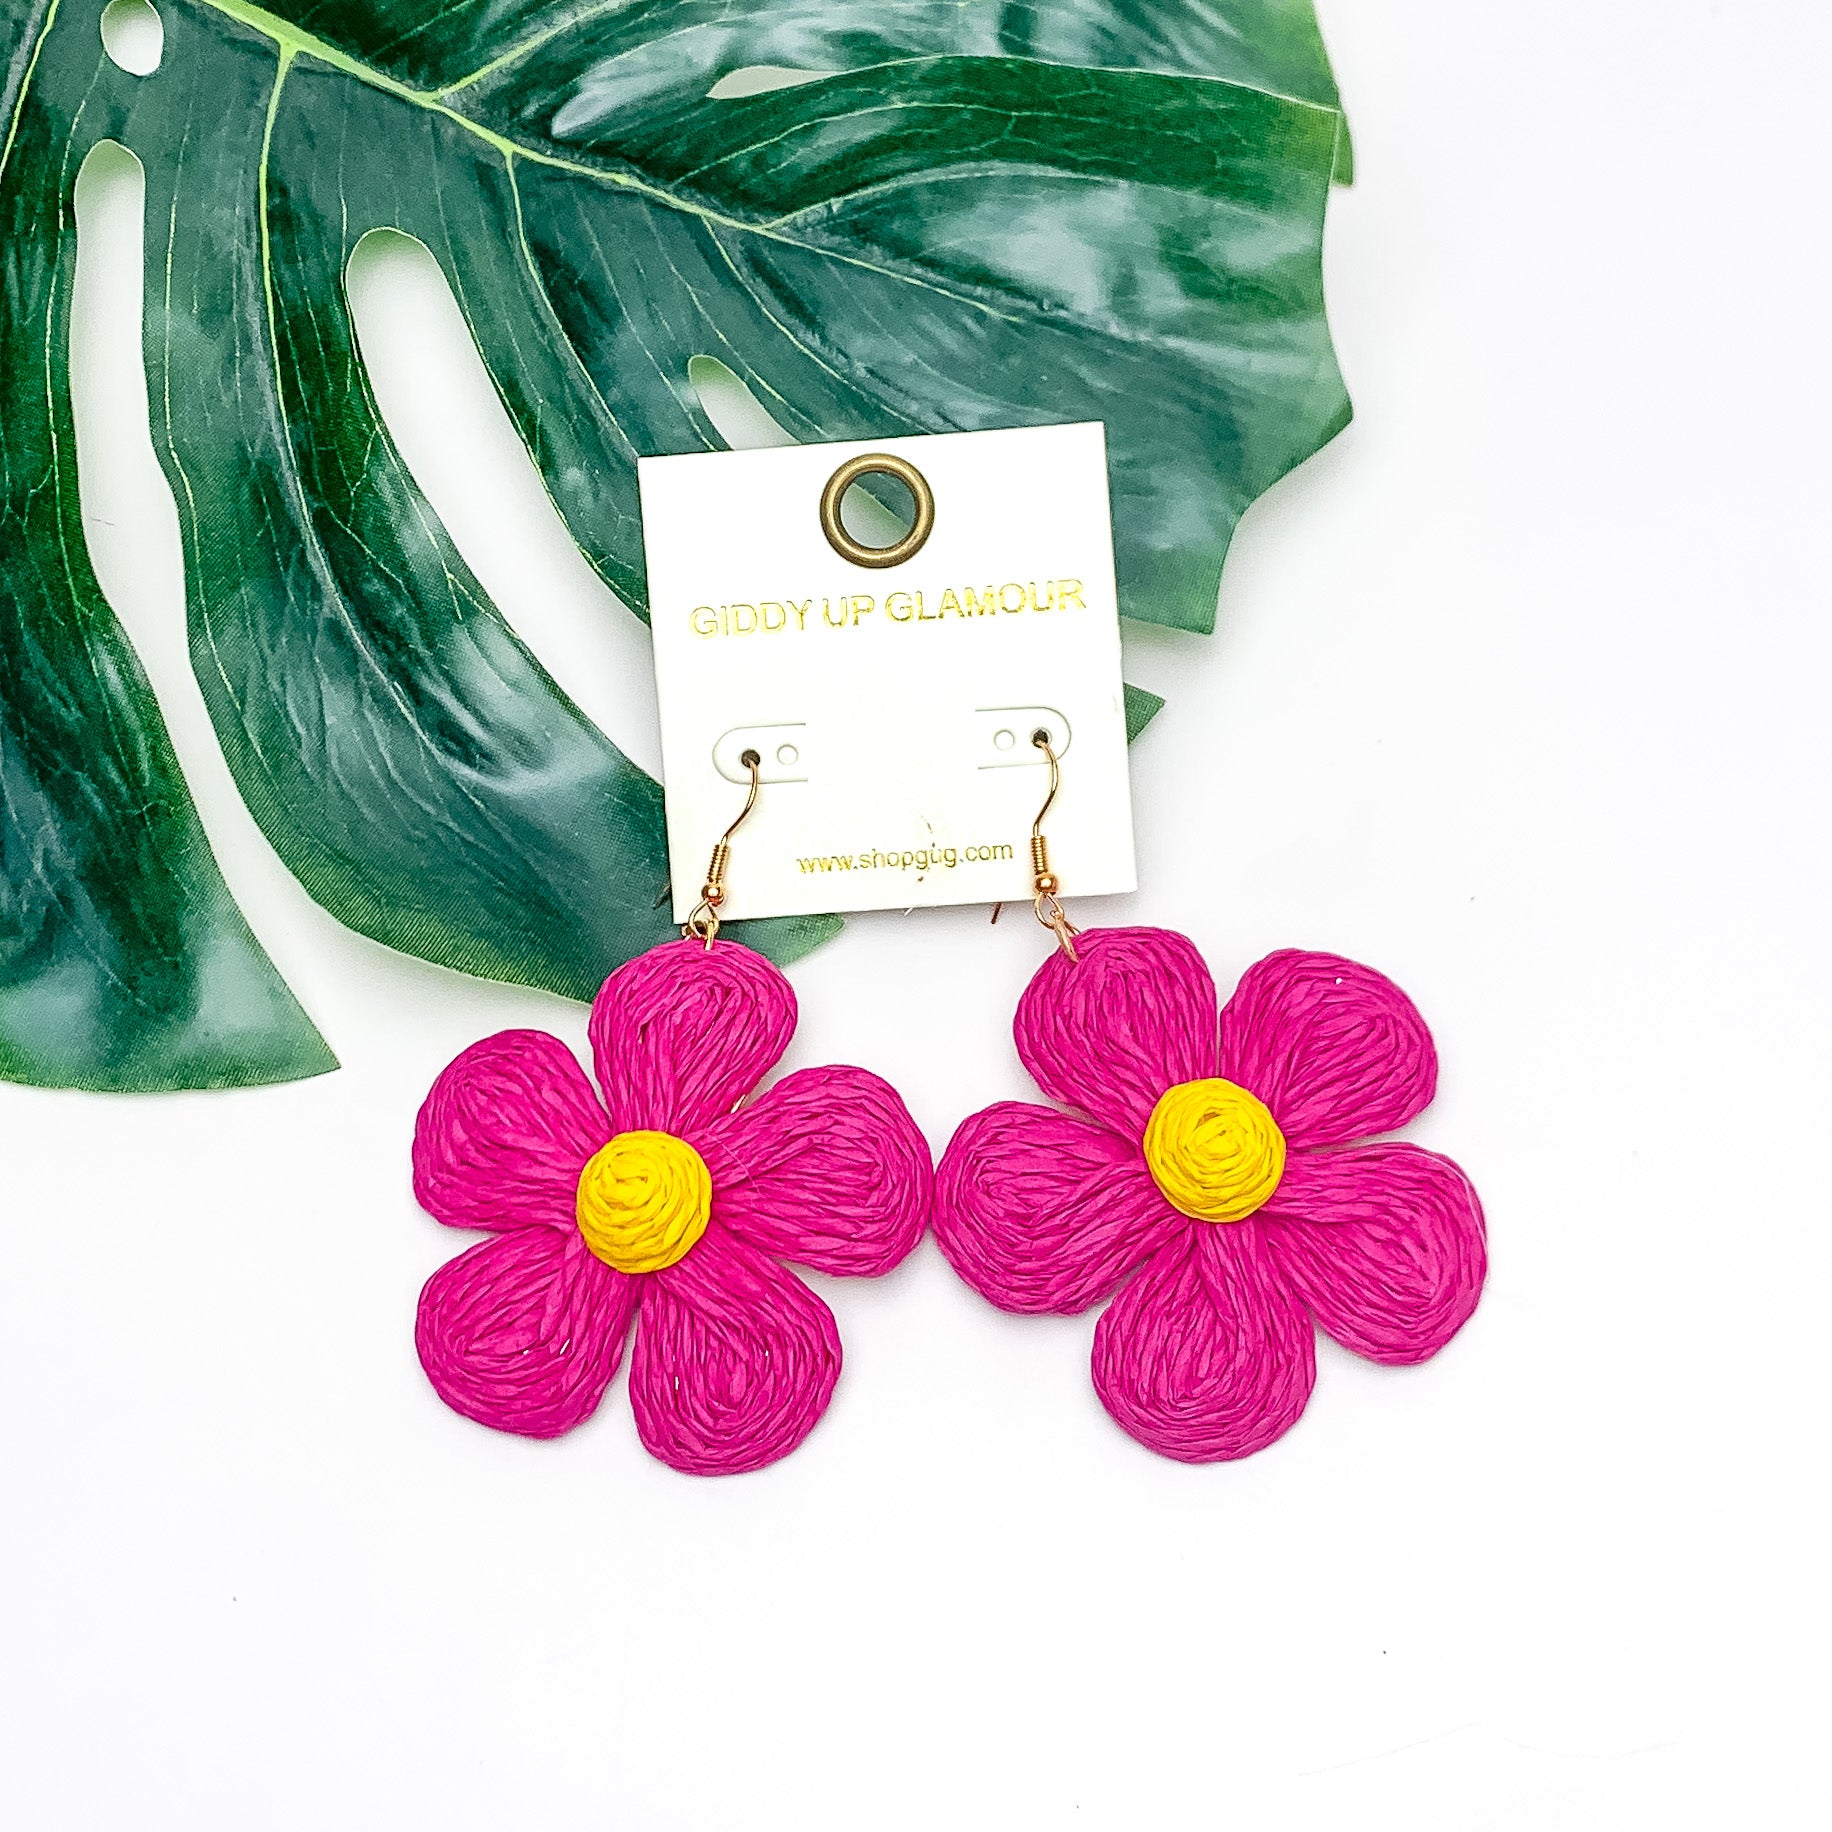 Darling Daisy Raffia Wrapped Flower Earrings in Hot Pink. Pictured on a white background with the earrings laying on a large leaf.